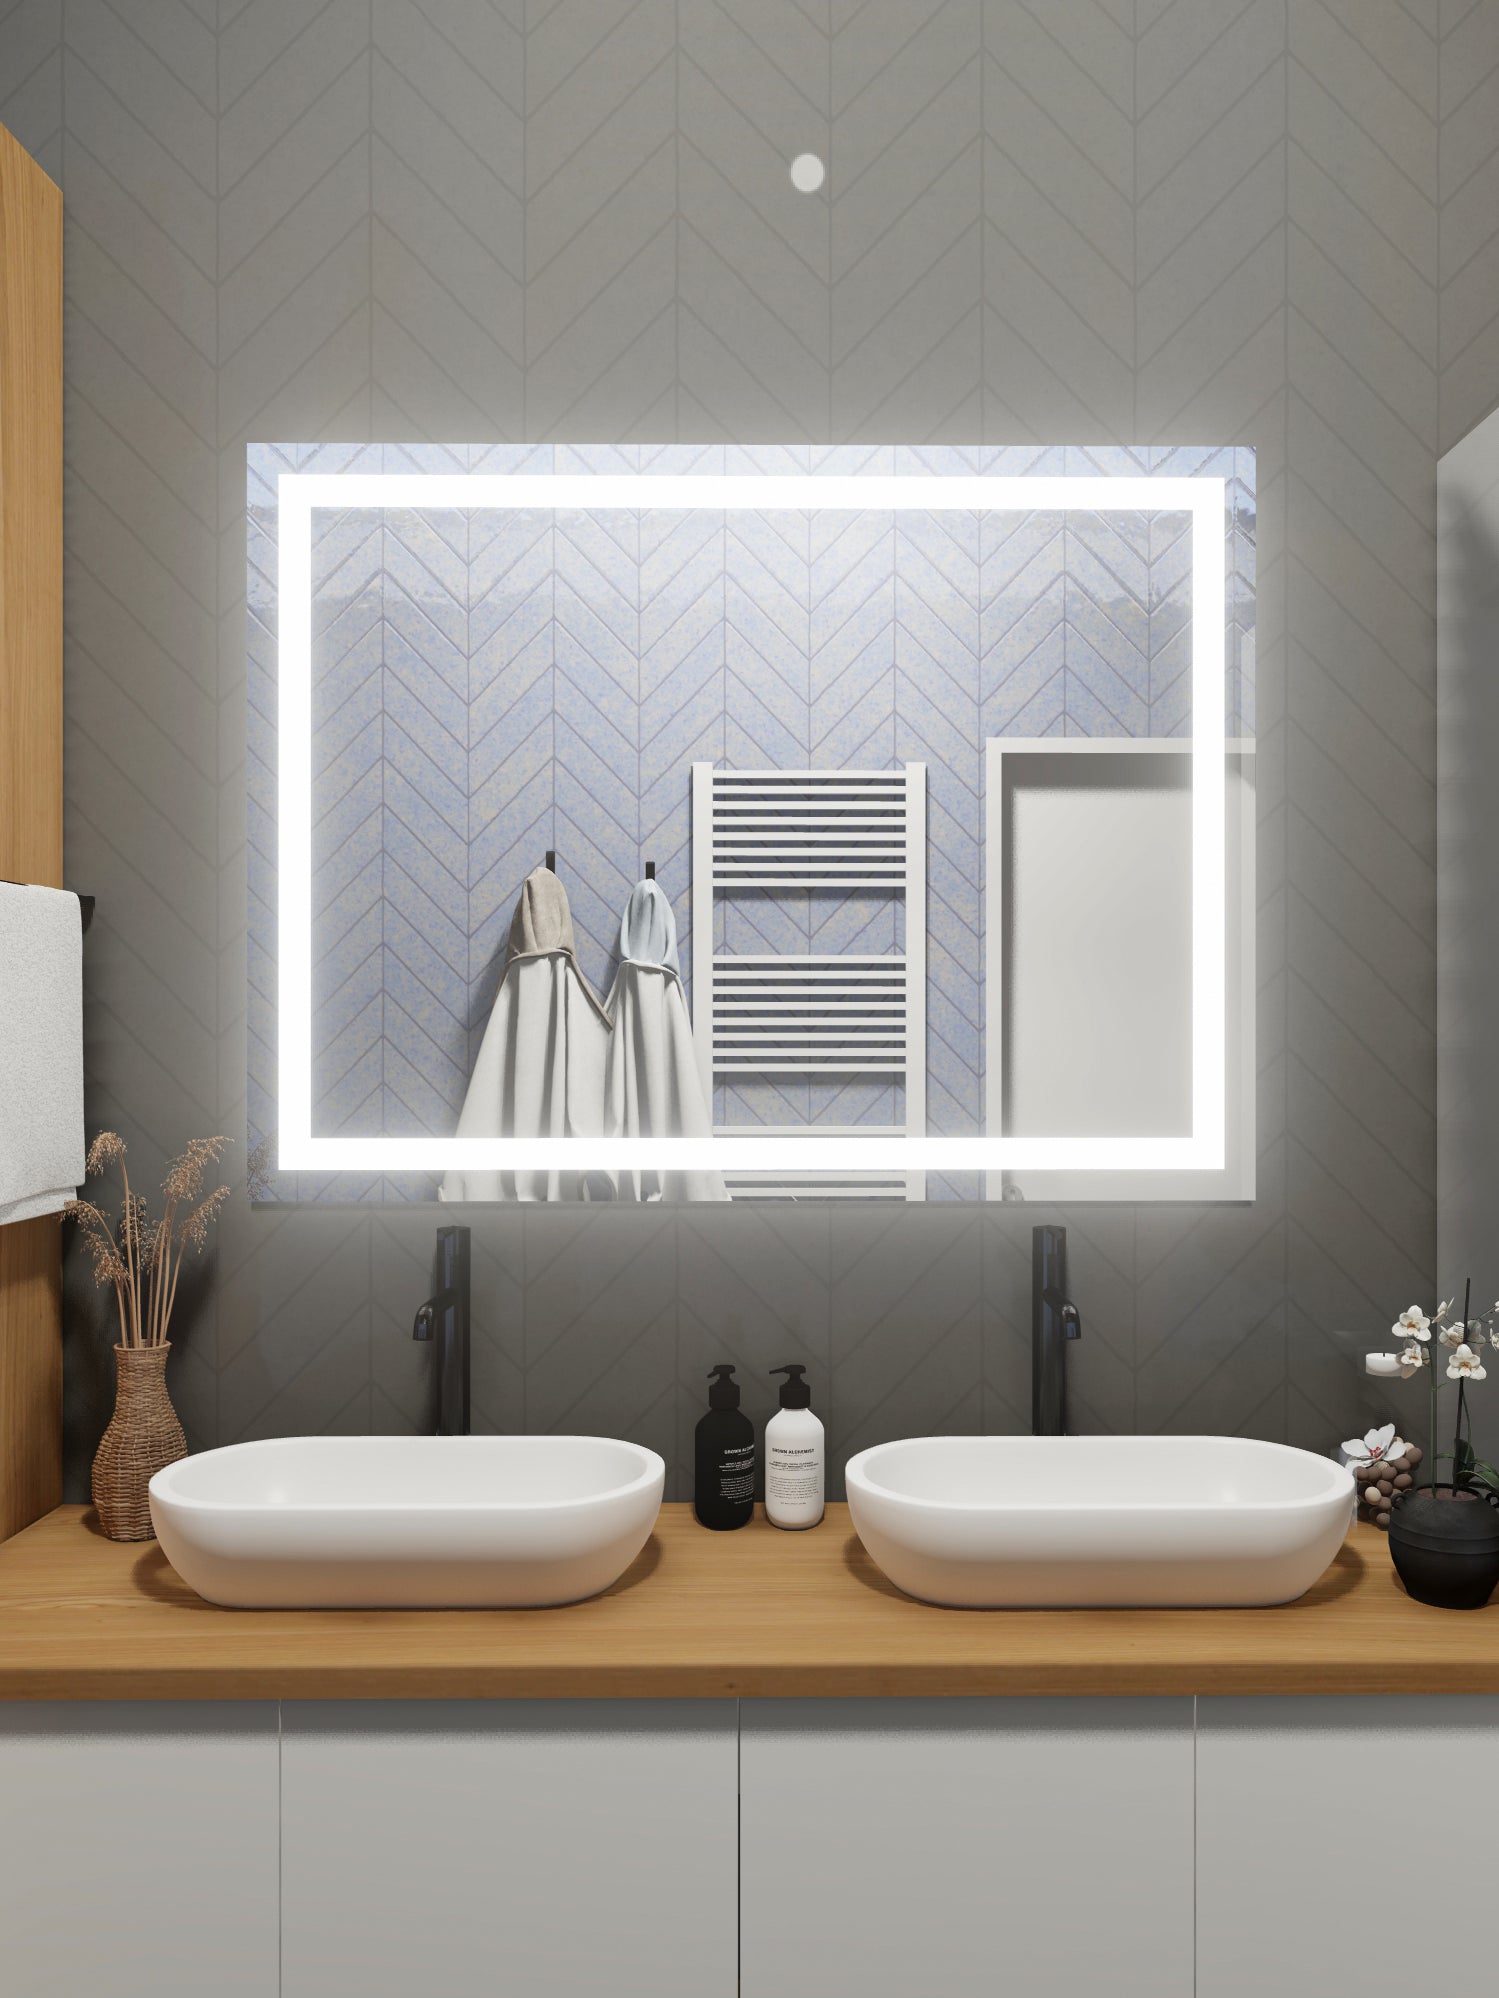 LED Mirror (Front-Lighted) 32" x 48" (or 48" x 32")